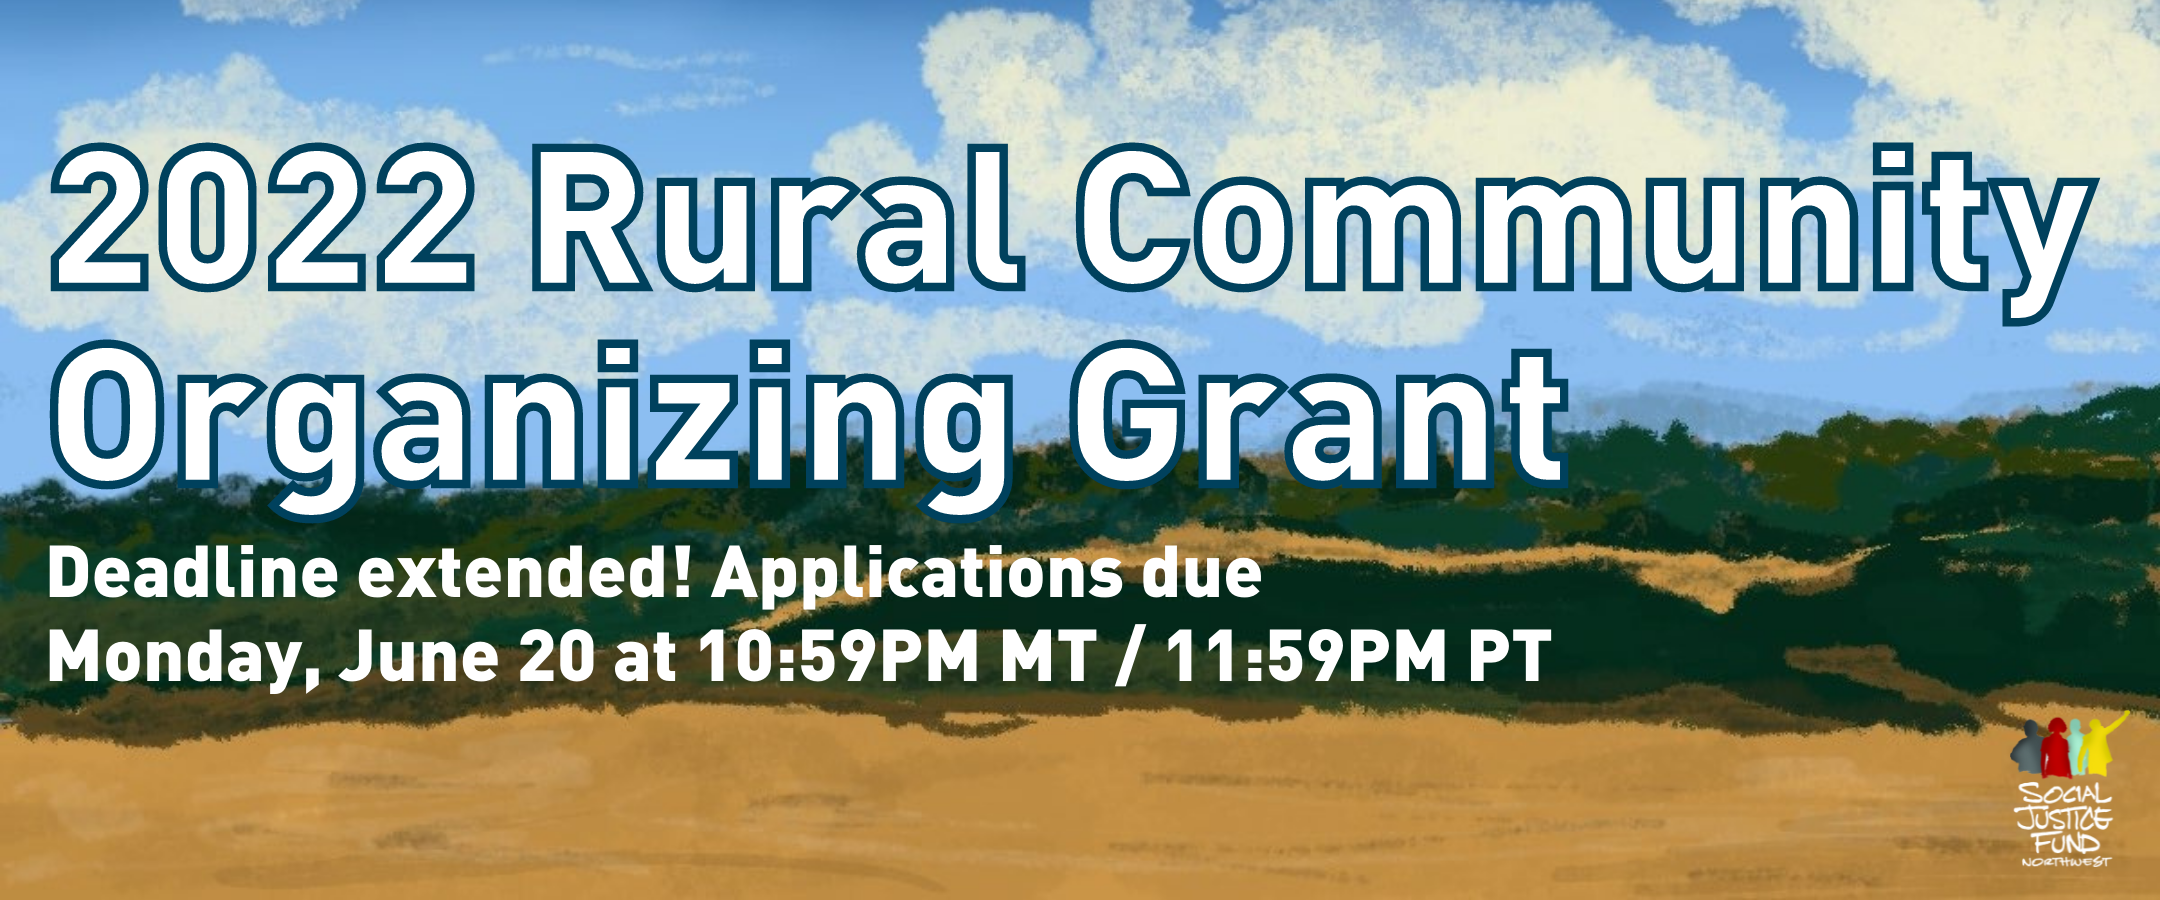 Banner illustration of a rural Idaho landscape. Text reads 2022 Rural Community Organizing Grant. Deadline extended. Applications due Monday June 20 by 10.59PM MT 11.59 pm PT.